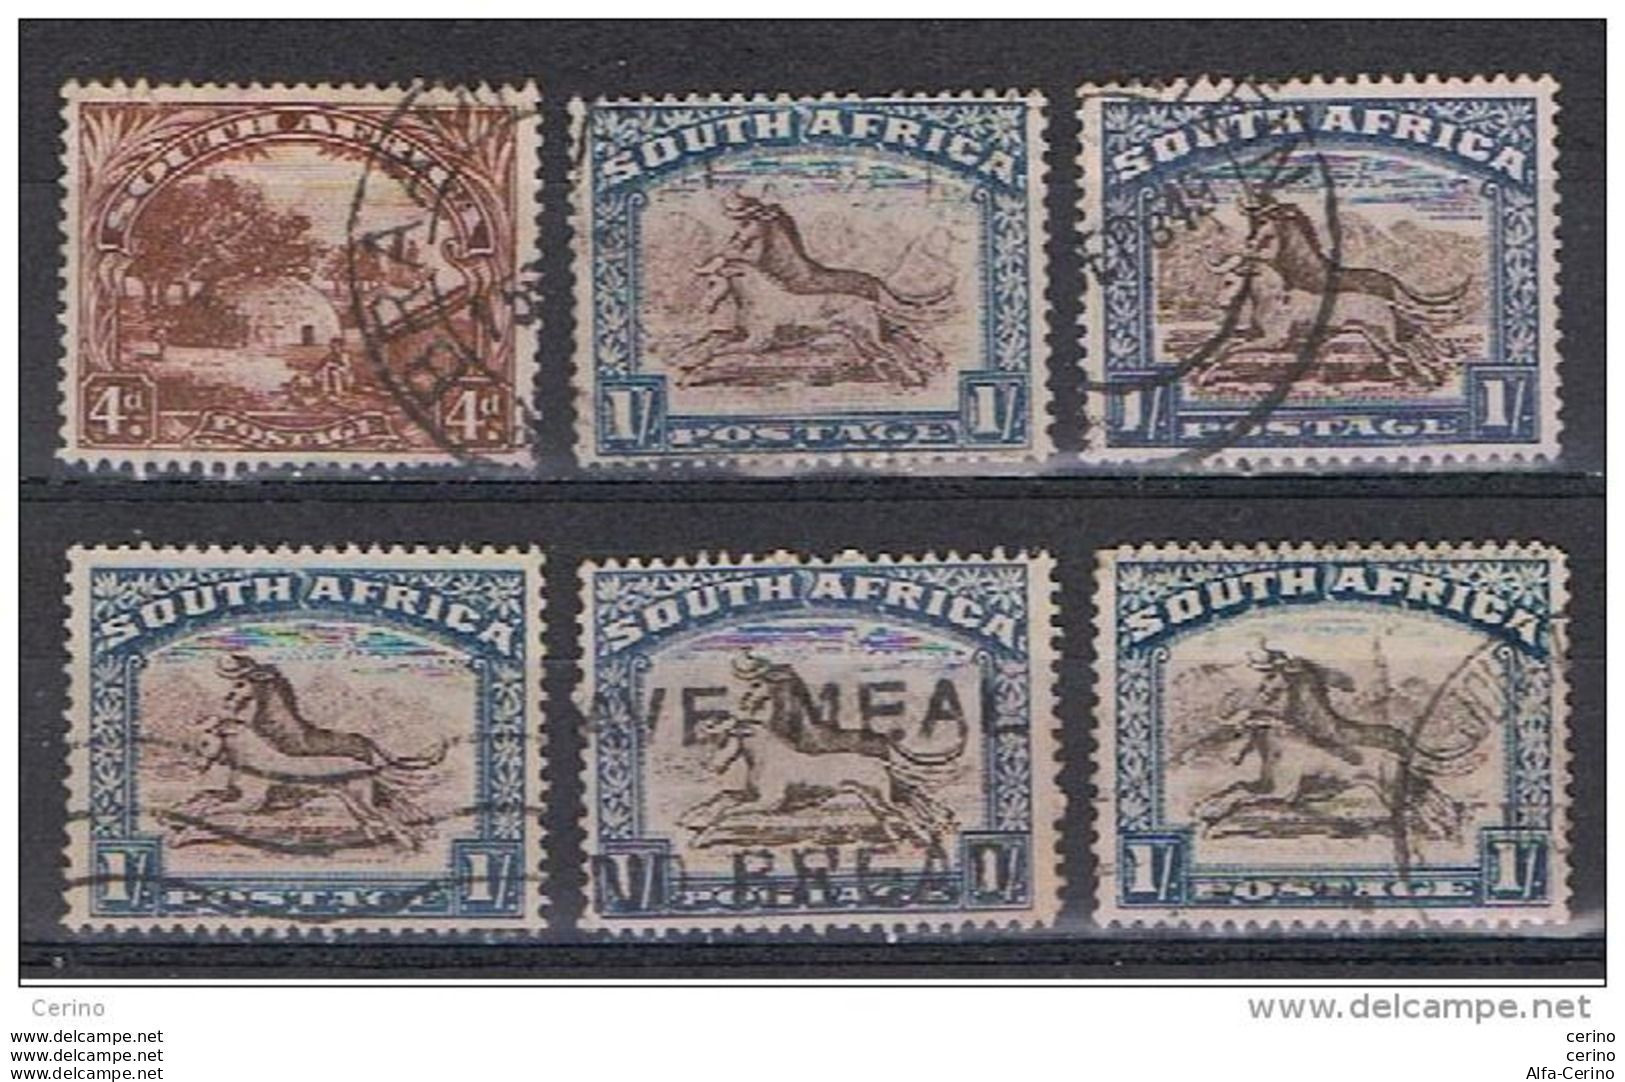 SOUTH   AFRICA:  1927/28  ORDINARY  SERIES  -  LOT  6  USED  STAMPS  -  YV/TELL. 26 + 27x5 - Gebraucht